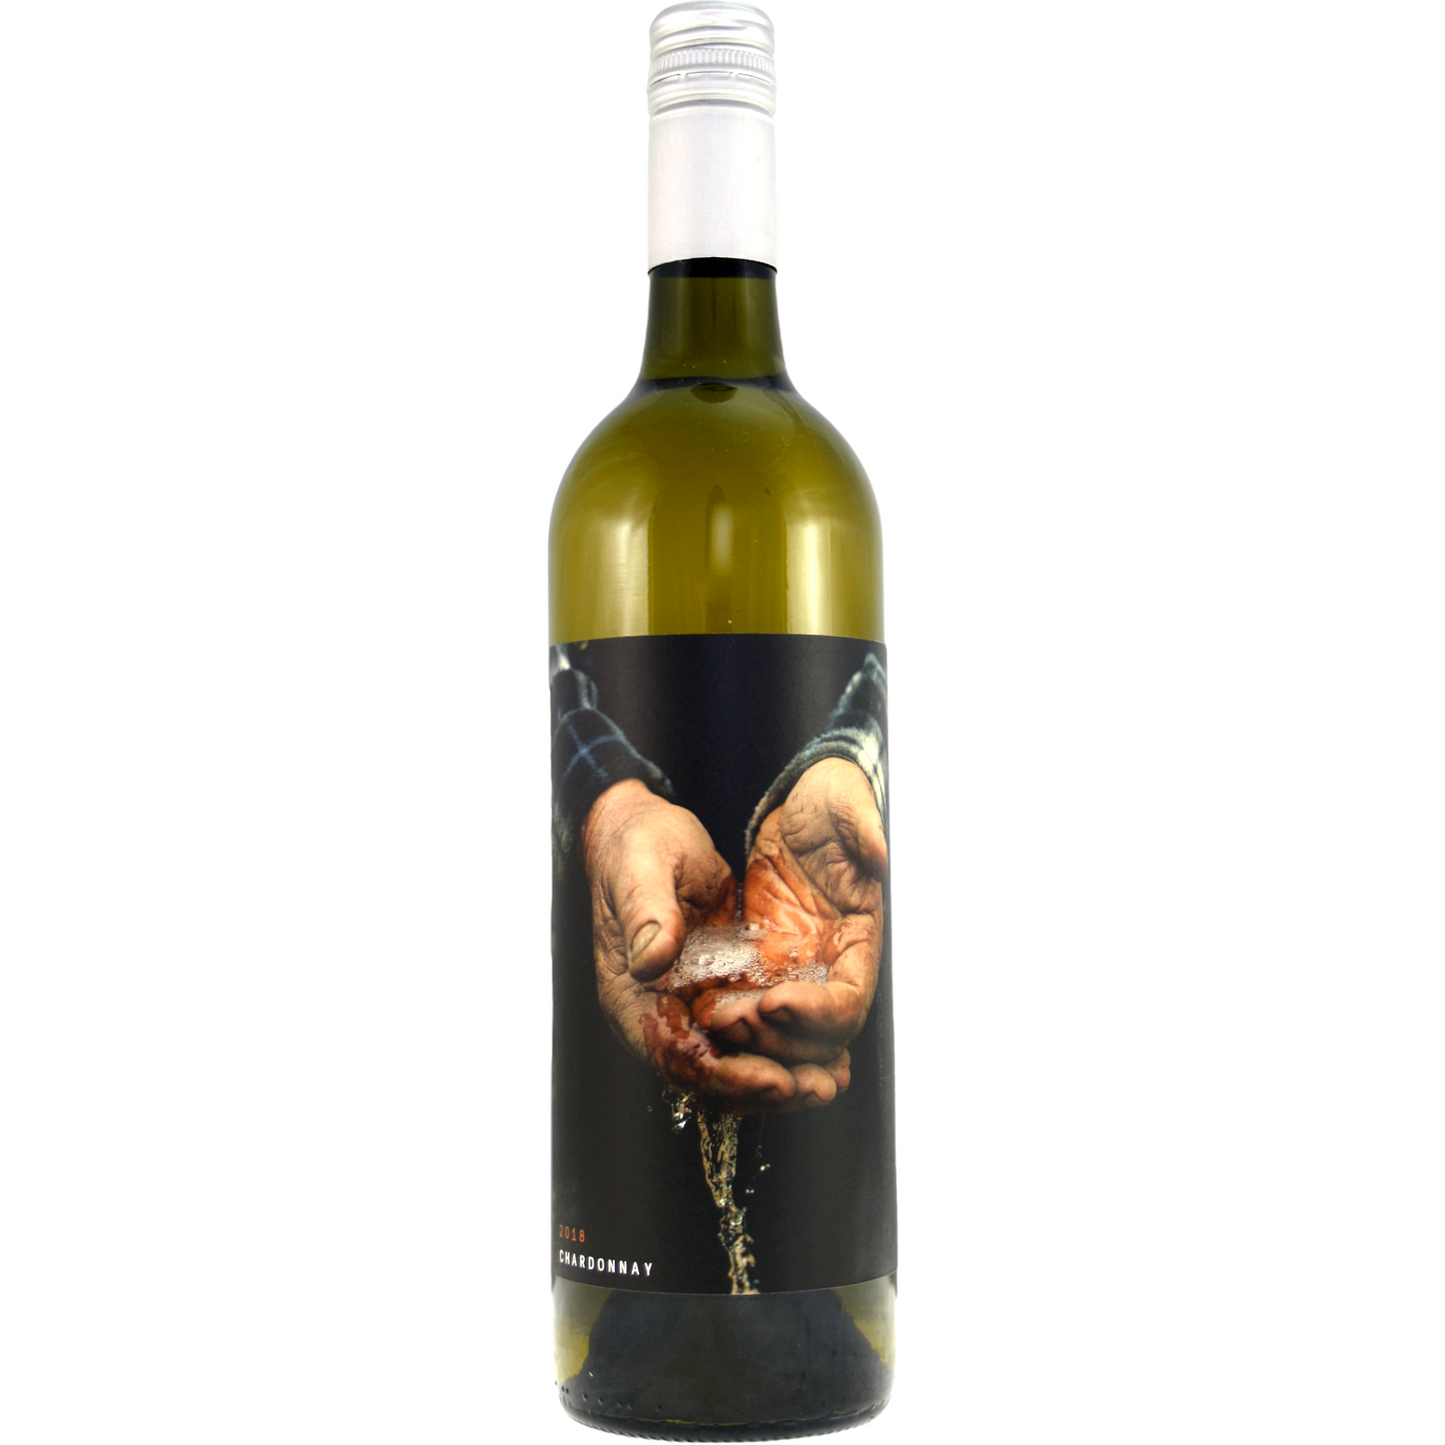 A GROWER'S TOUCH CHARDONNAY